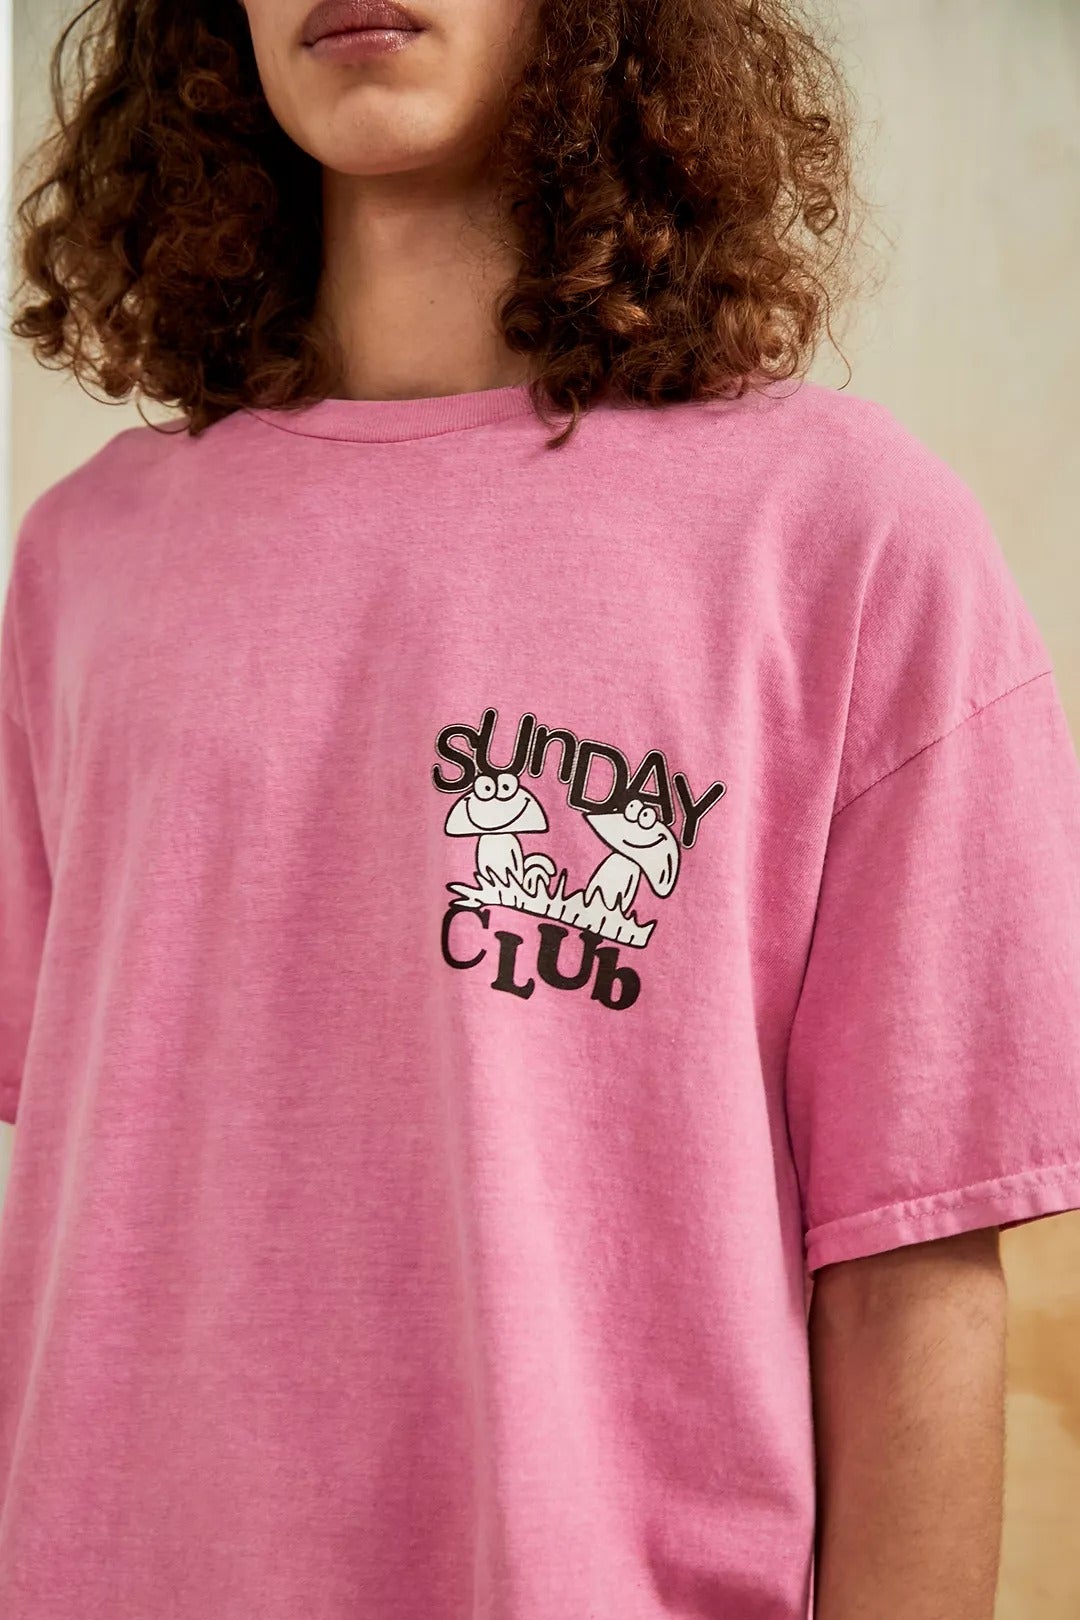 Urban Outfitters + Pink Sunday Club T-Shirt